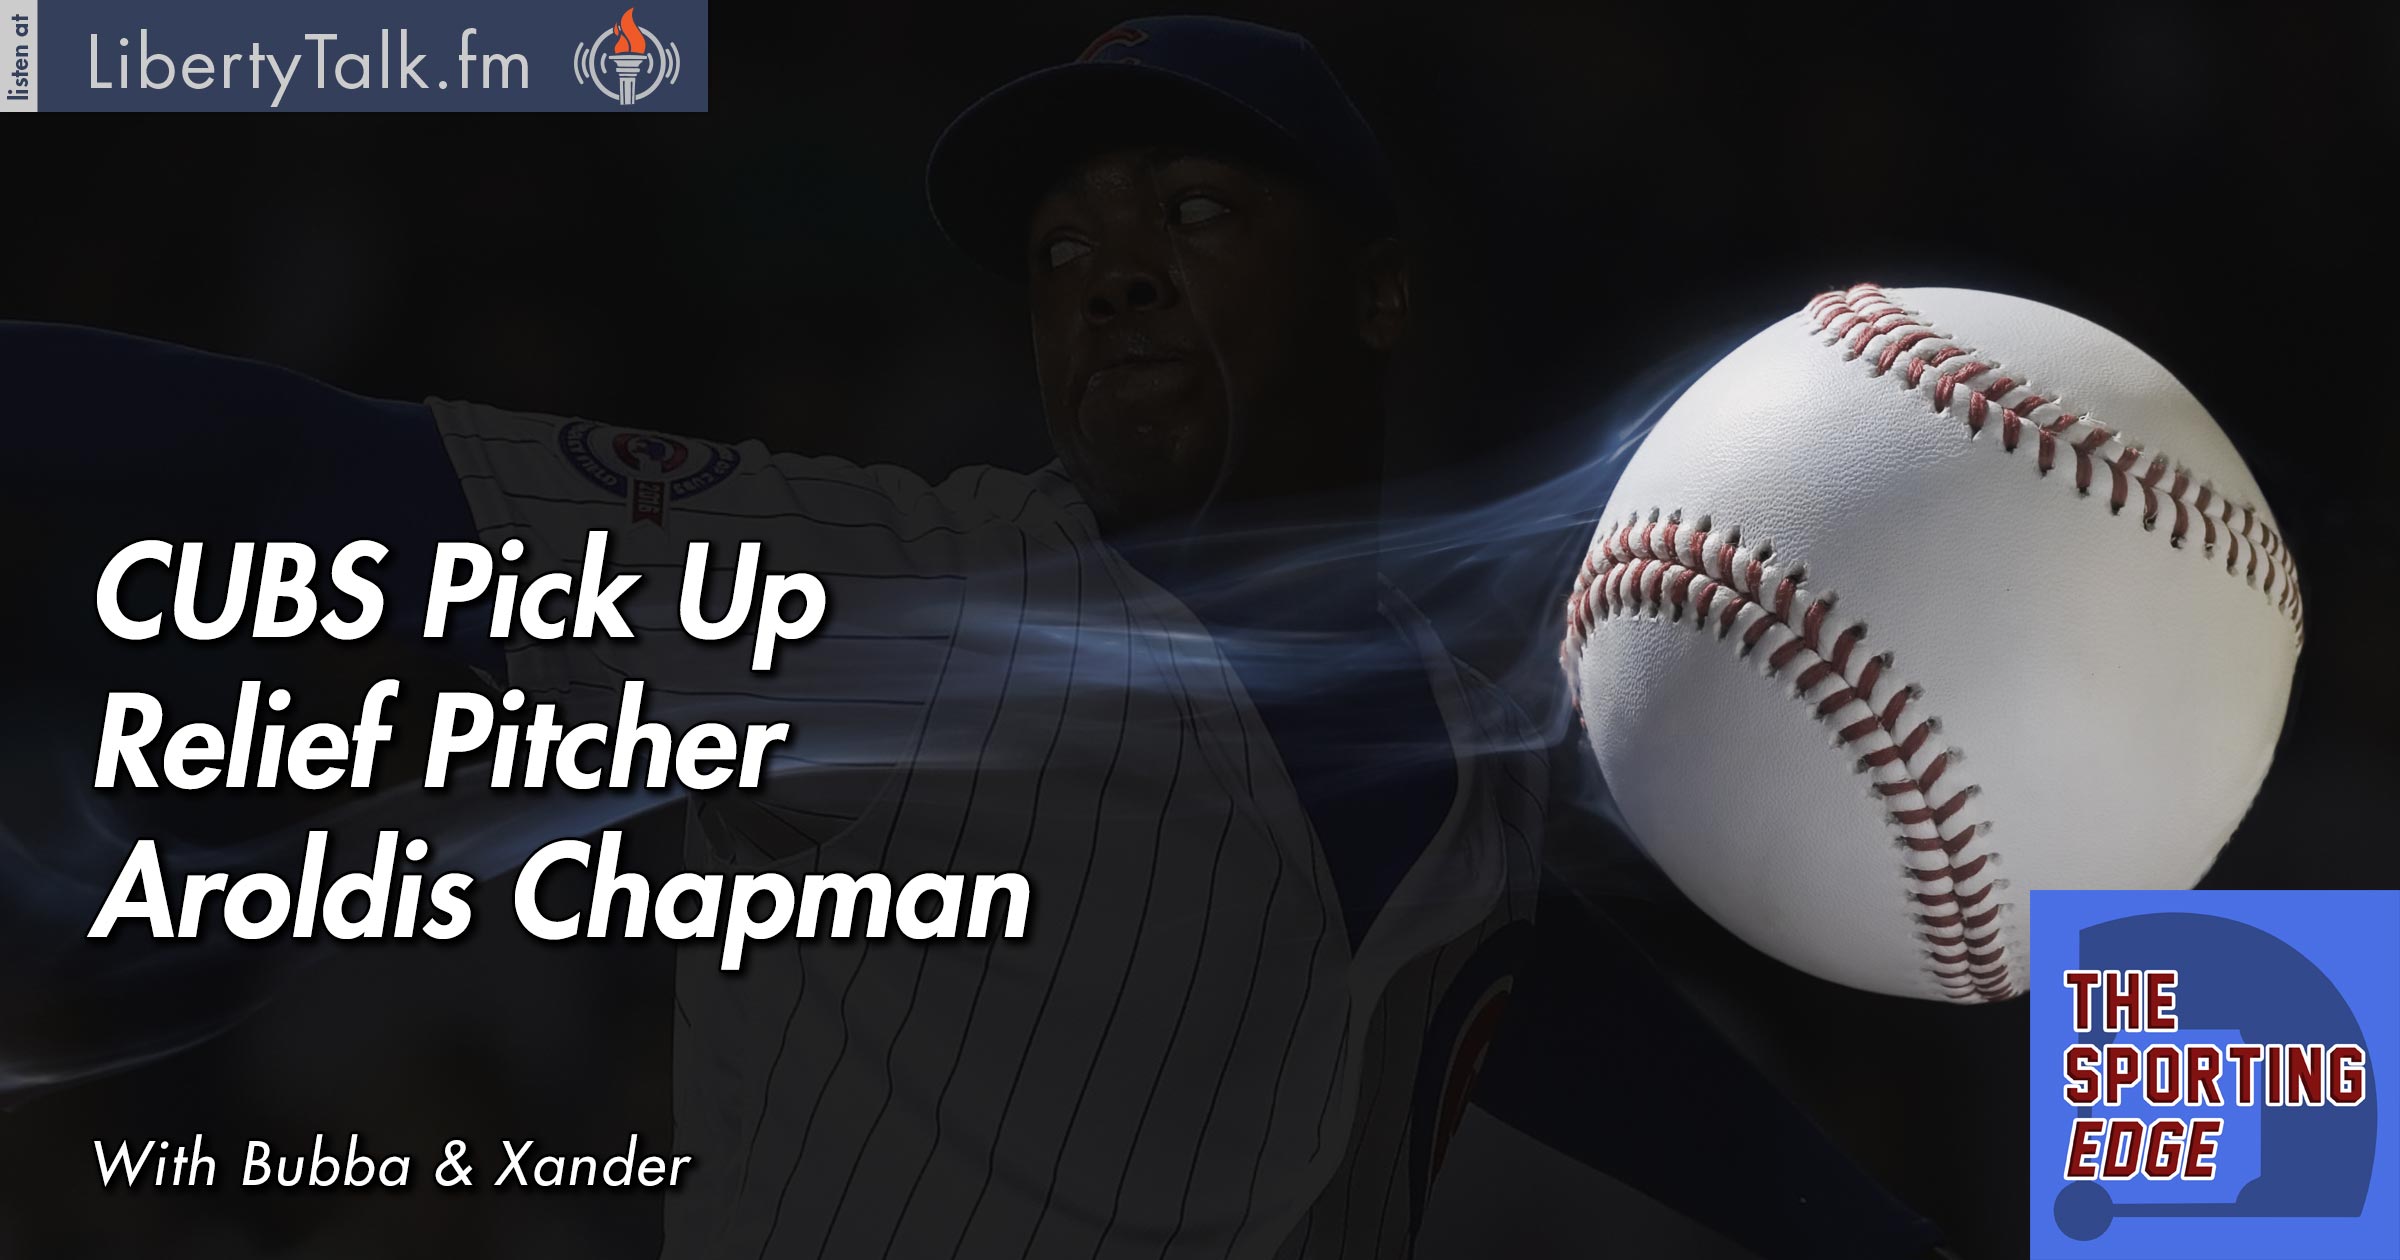 Cubs Pick Up Relief Pitcher Aroldis Chapman - The Sporting Edge